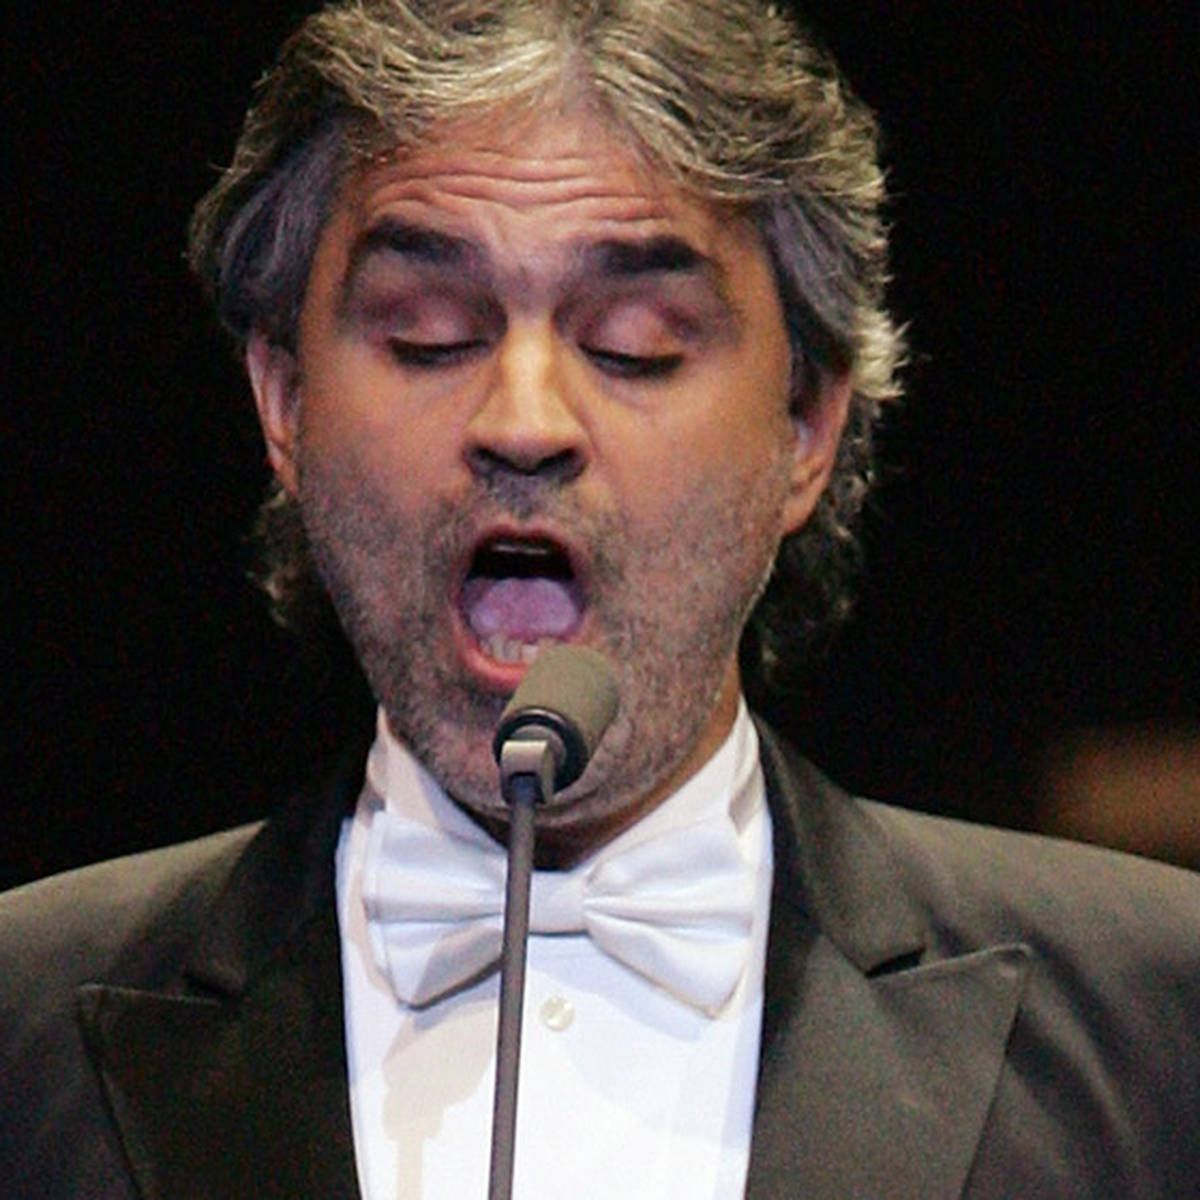 Andrea Bocelli's greatest songs of all time - Classic FM